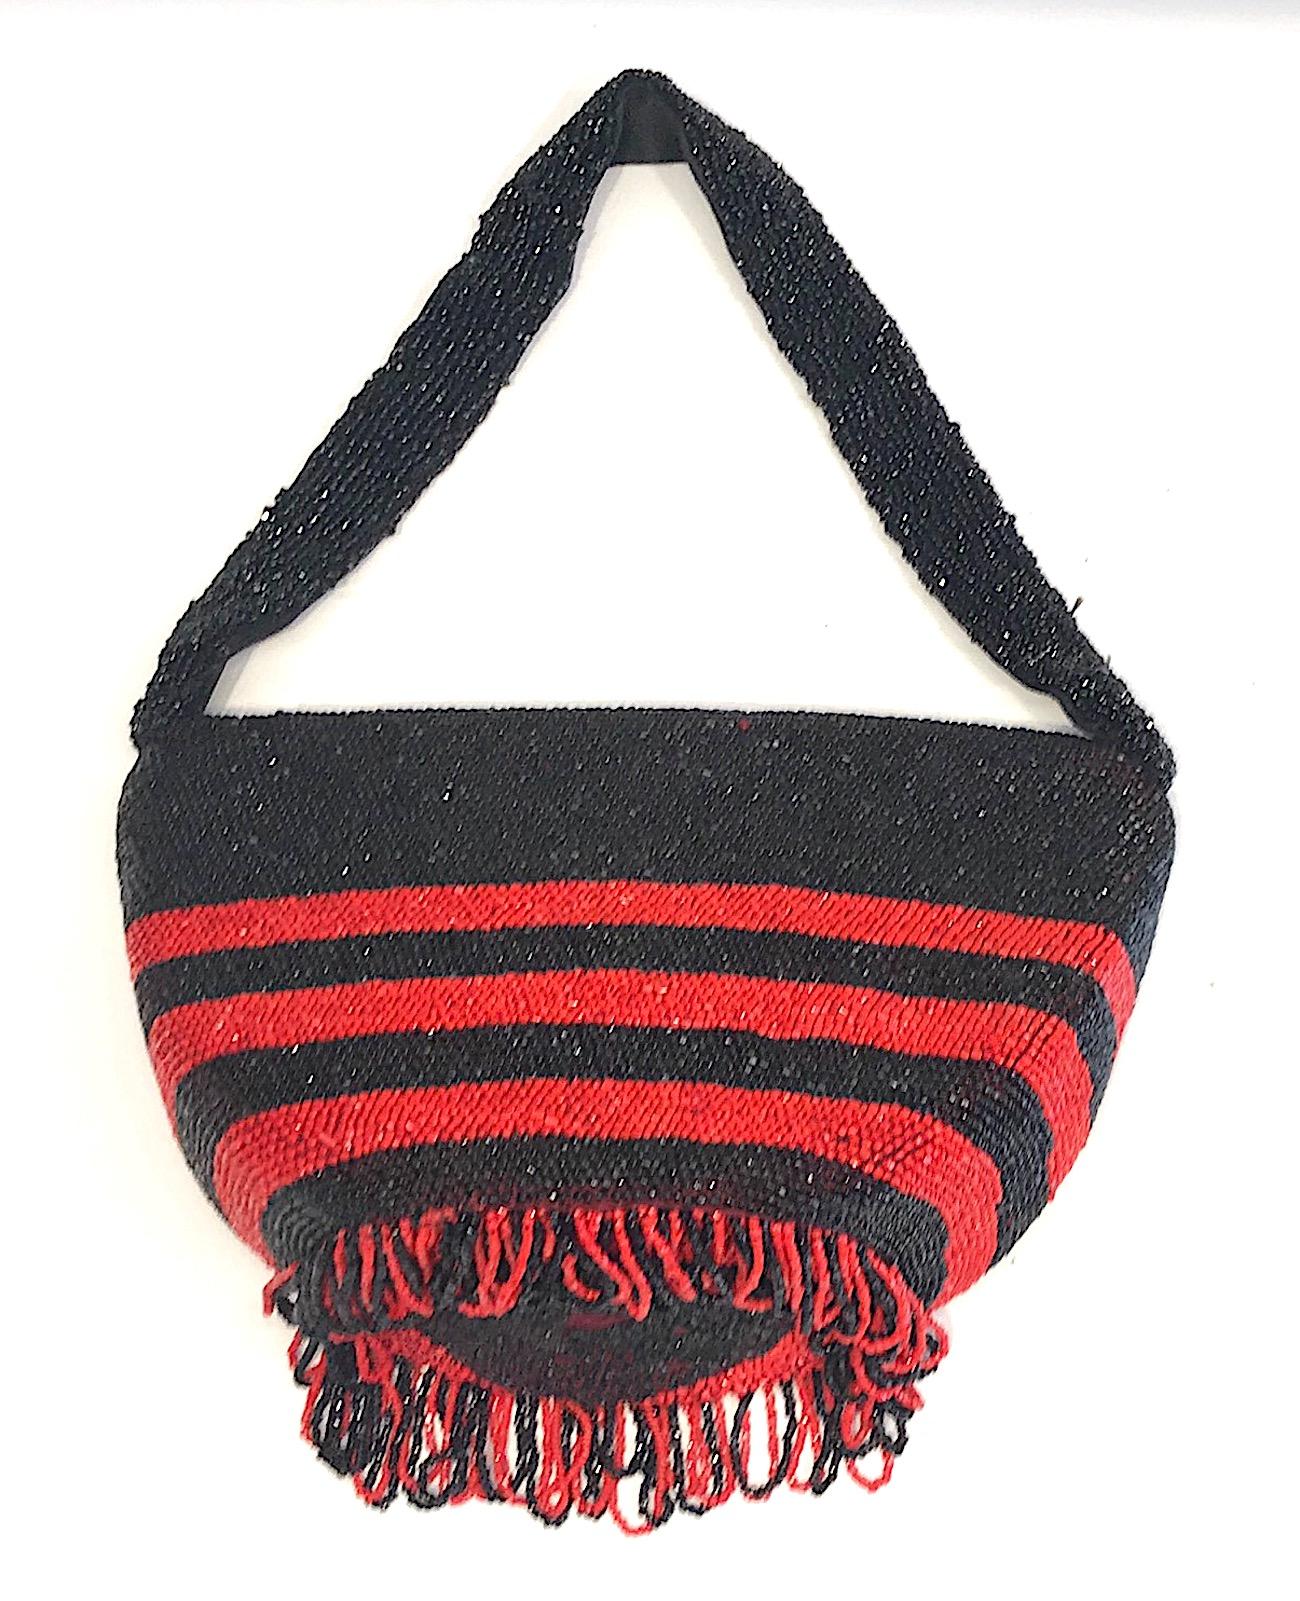 An elegant and chic design 1920s Art Deco handbag in black and red beadwork. The body of the bag is firm with a flat round bottom to maintain its shape when set on a surface. The entire exterior of the bag and top of the 1 inch wide fabric handle